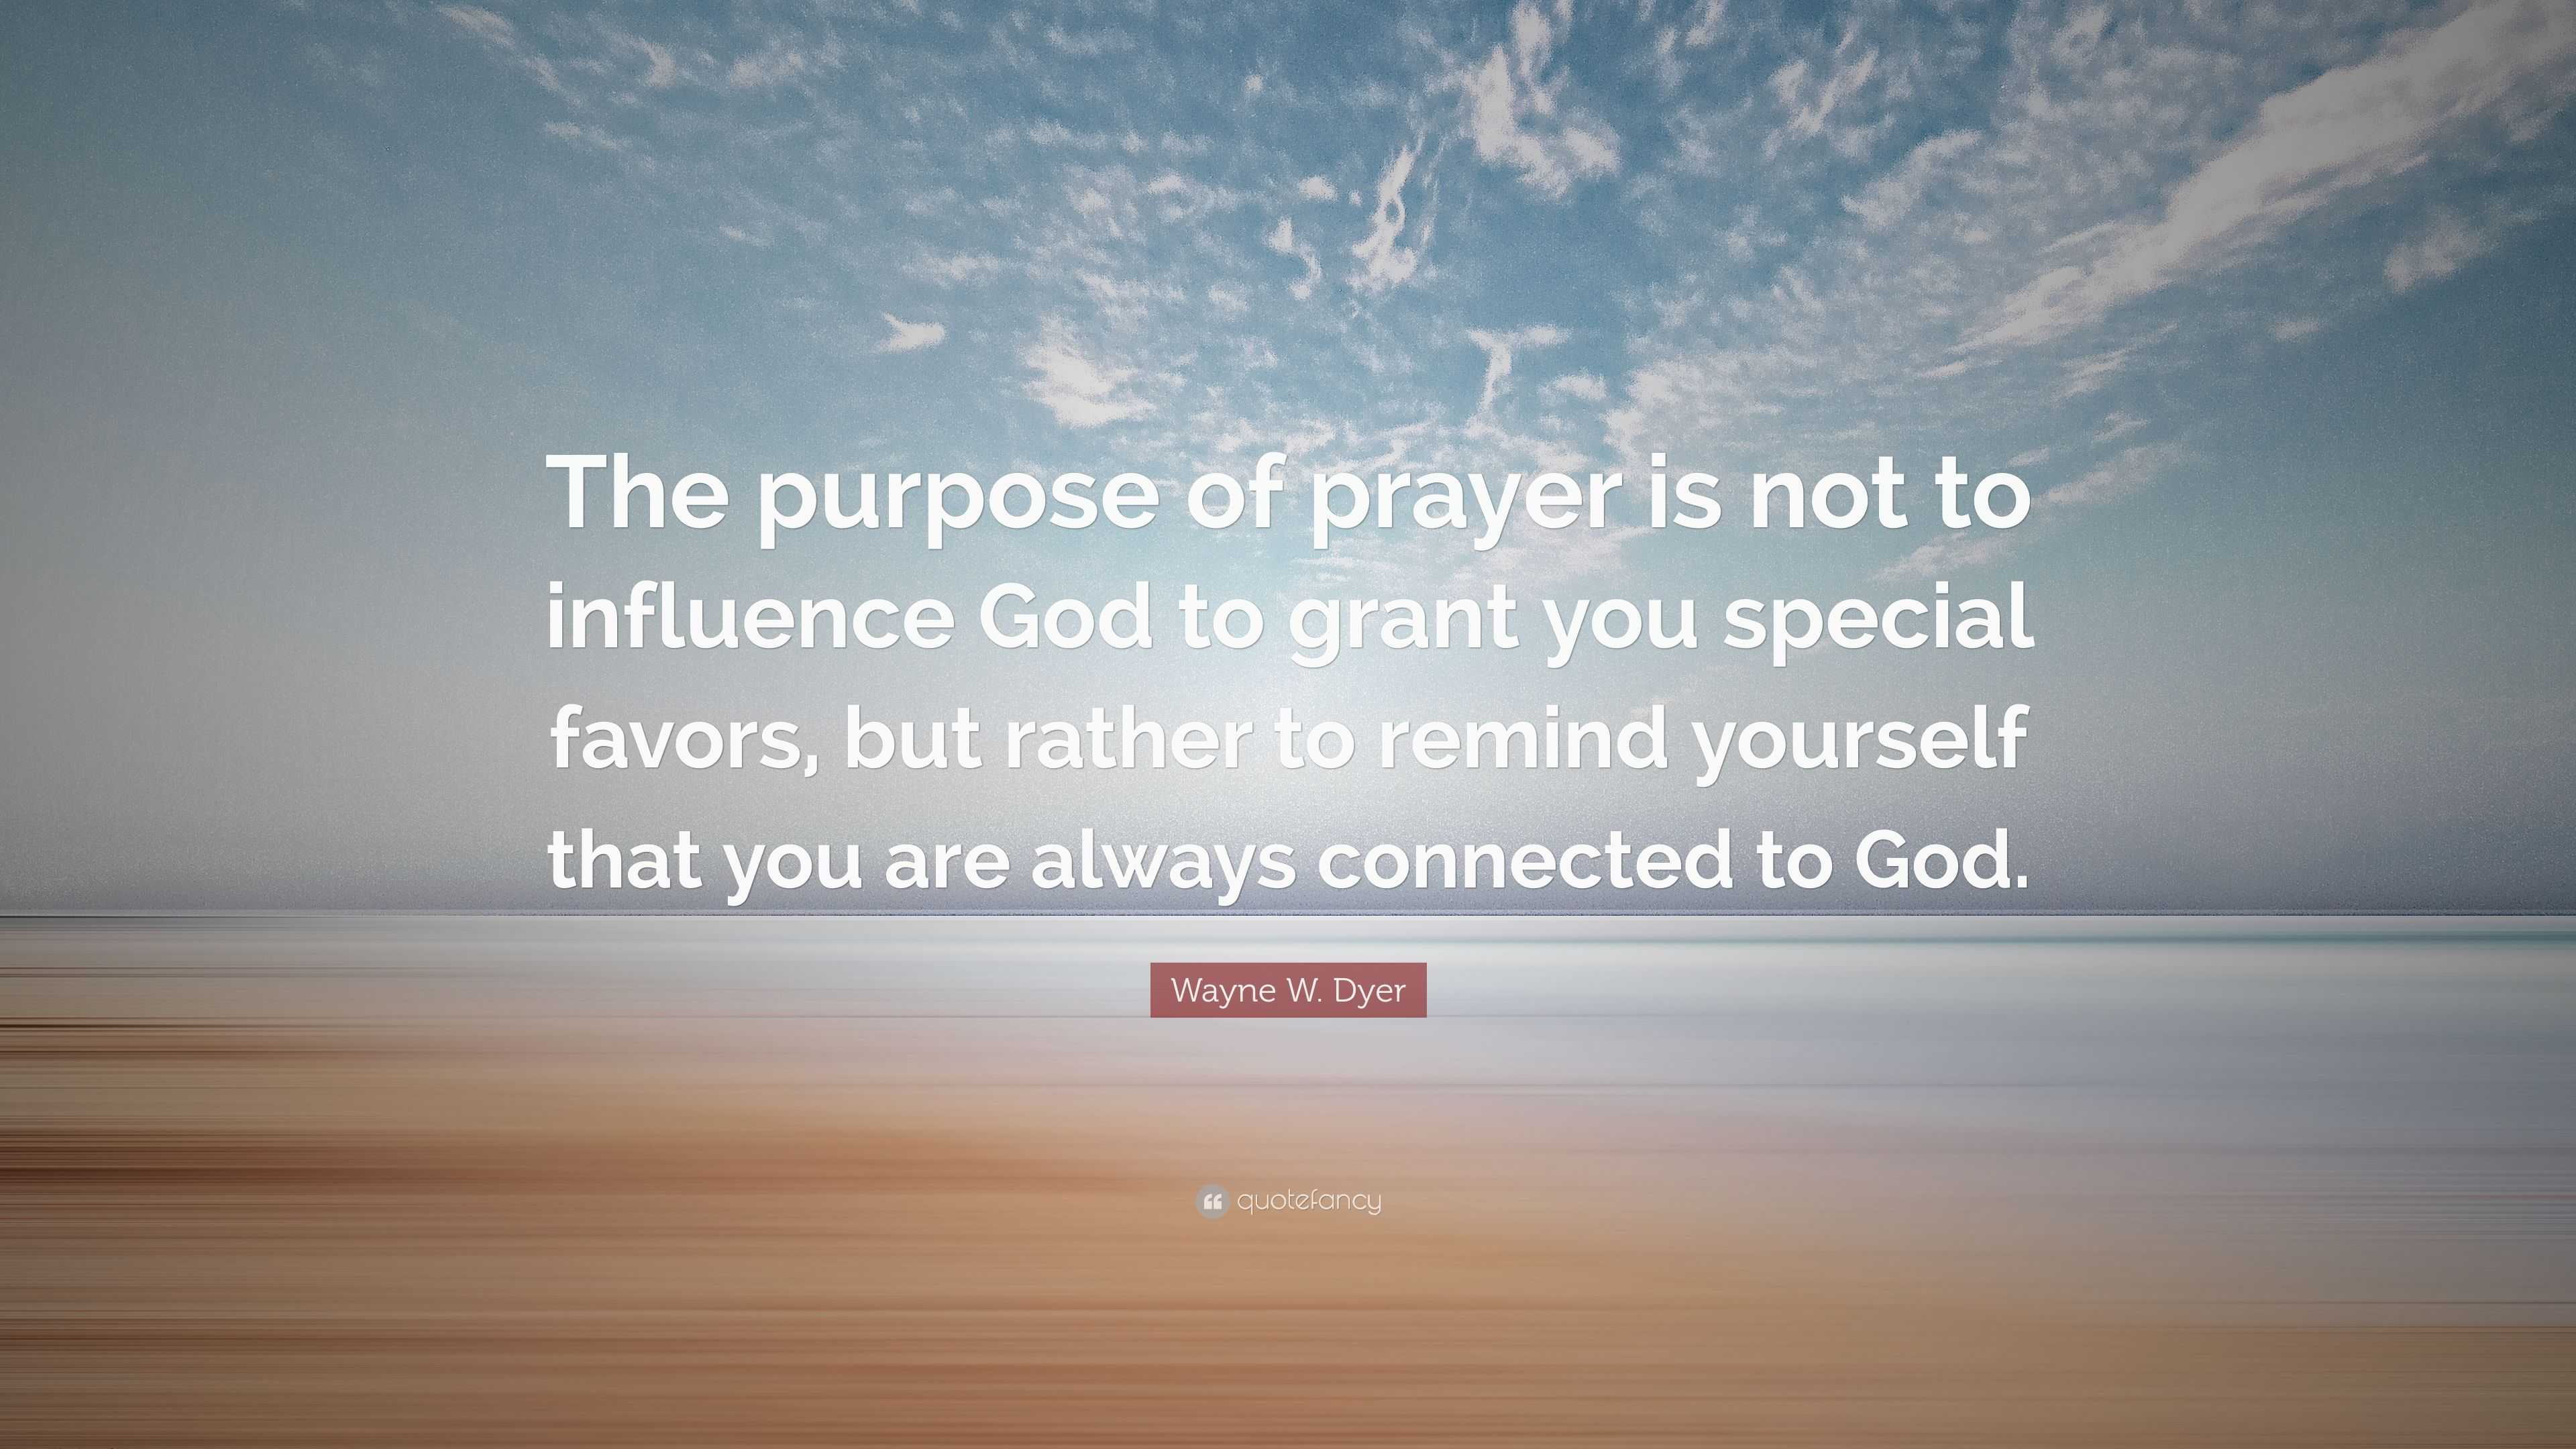 Wayne W. Dyer Quote: “The purpose of prayer is not to influence God to ...